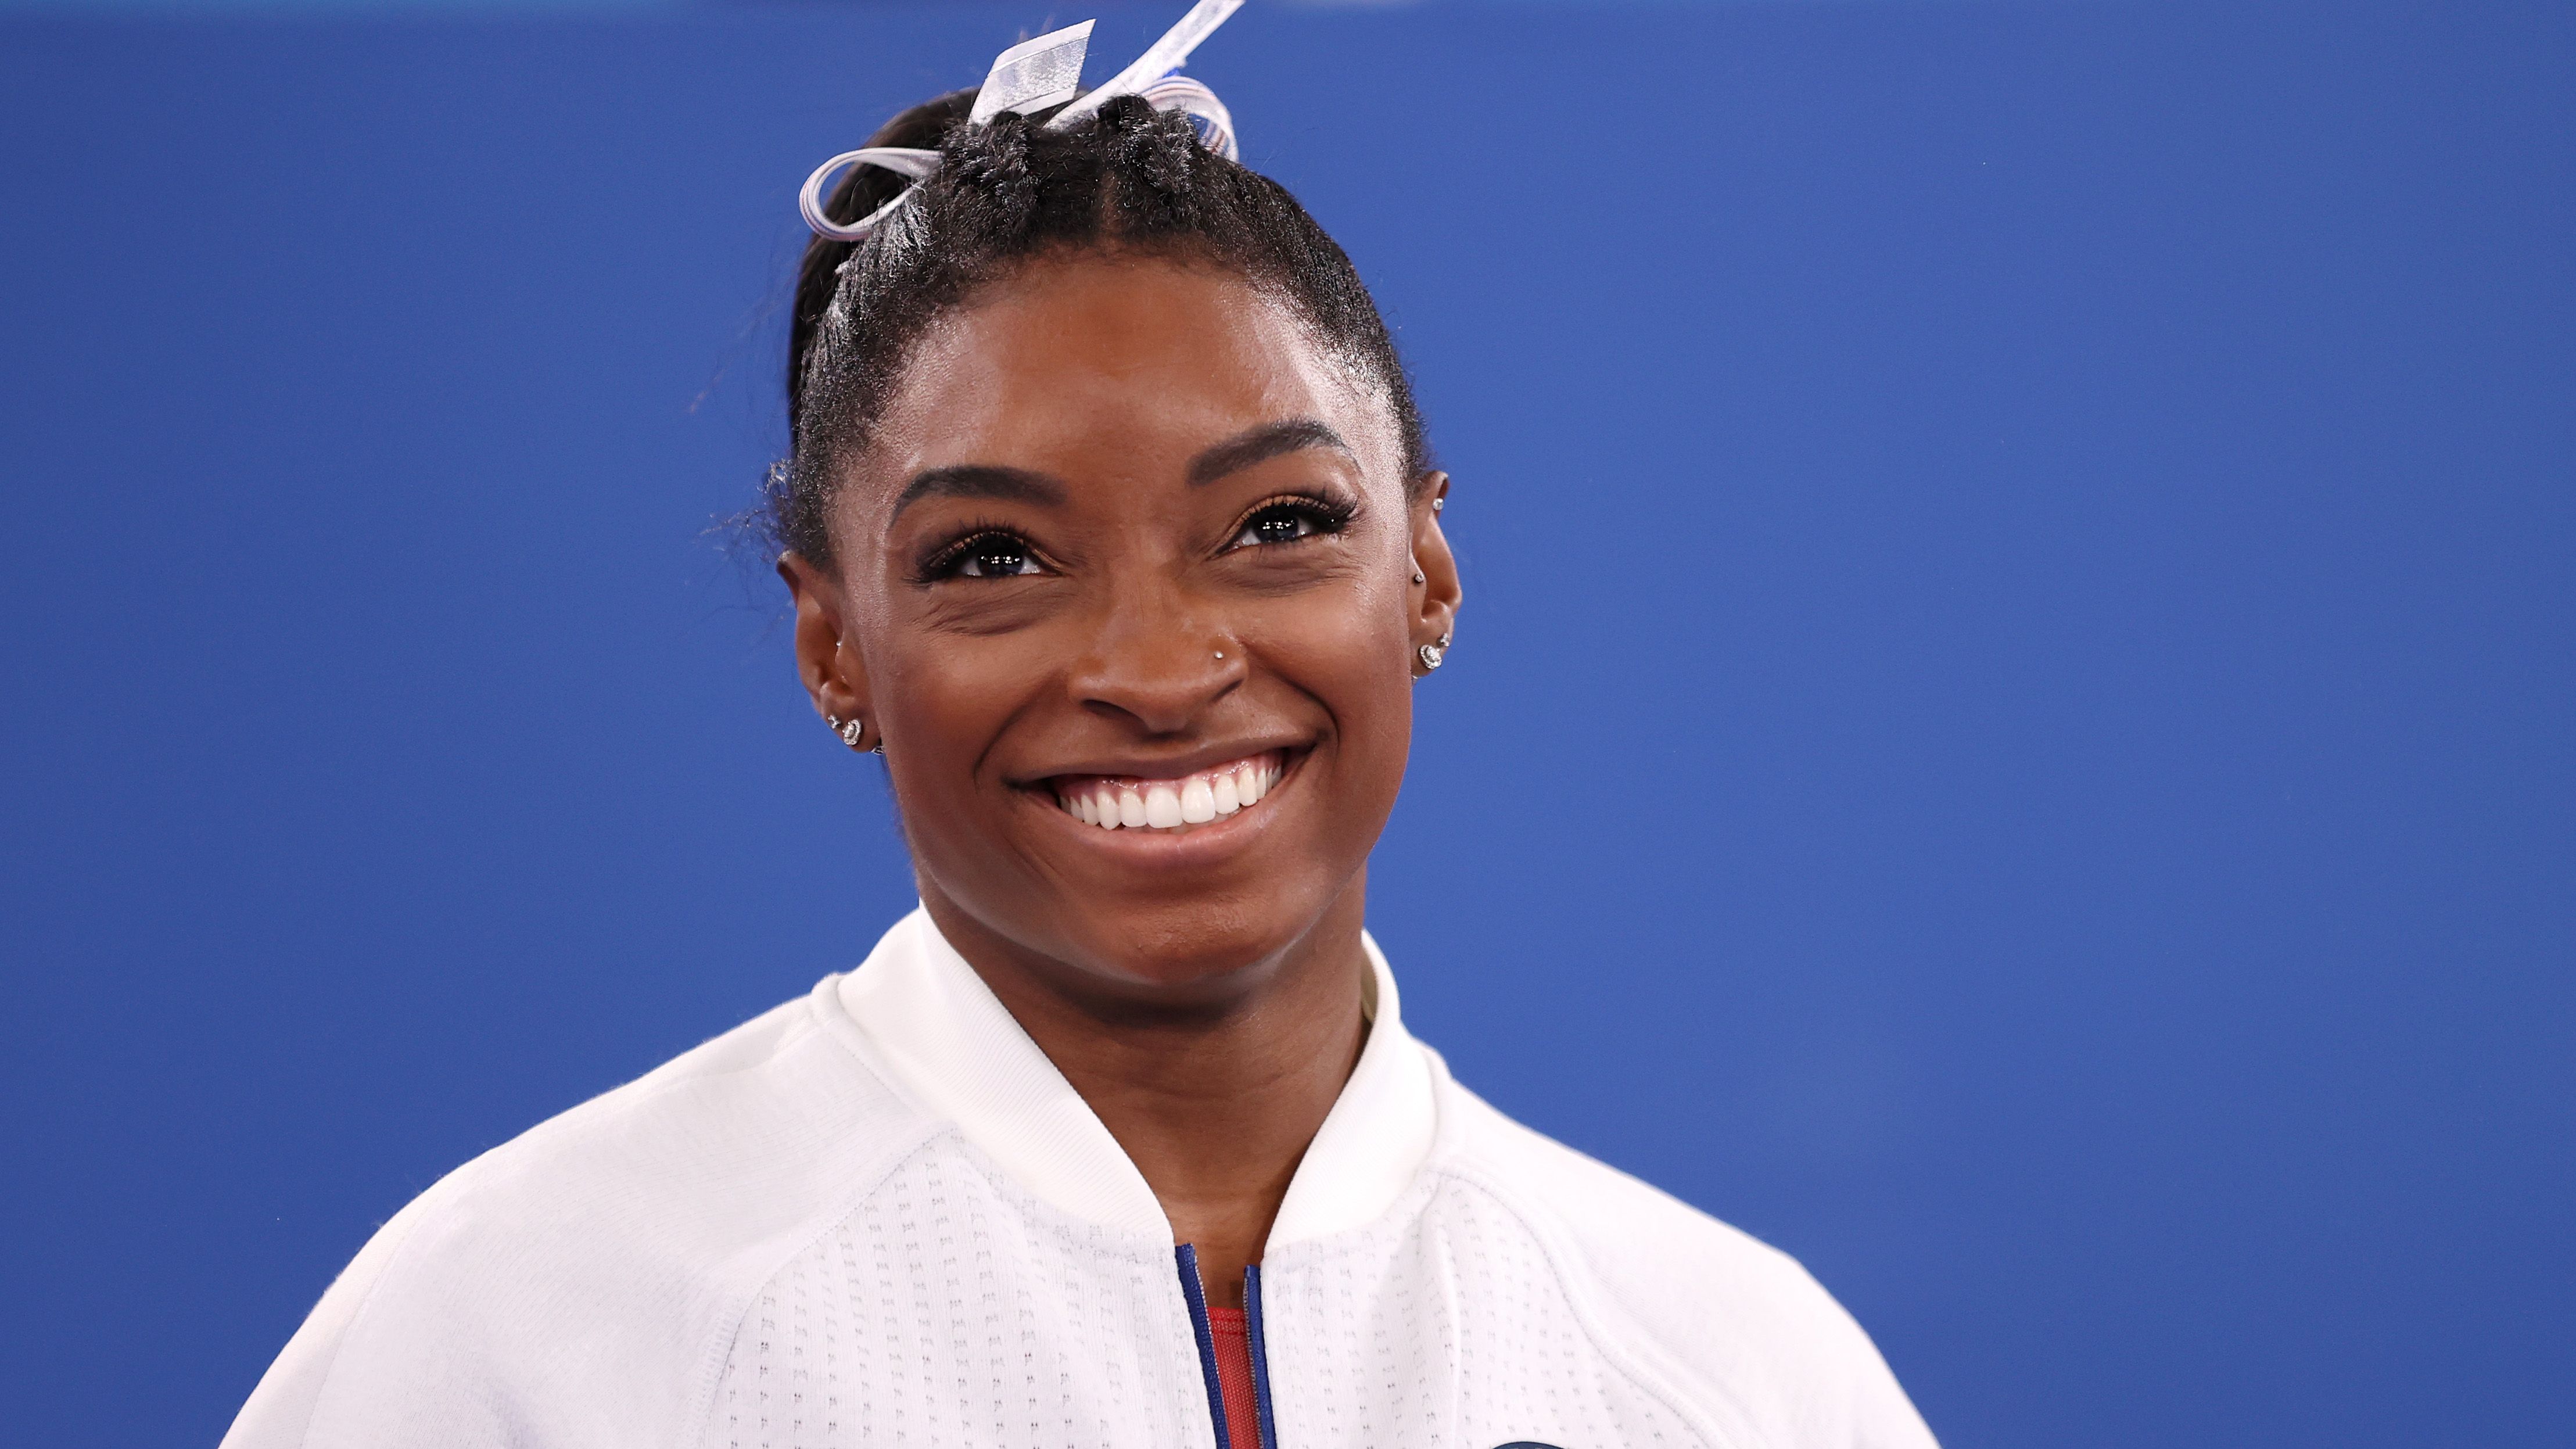 What Events Did Simone Biles Compete in at the 2020 Tokyo Olympics?